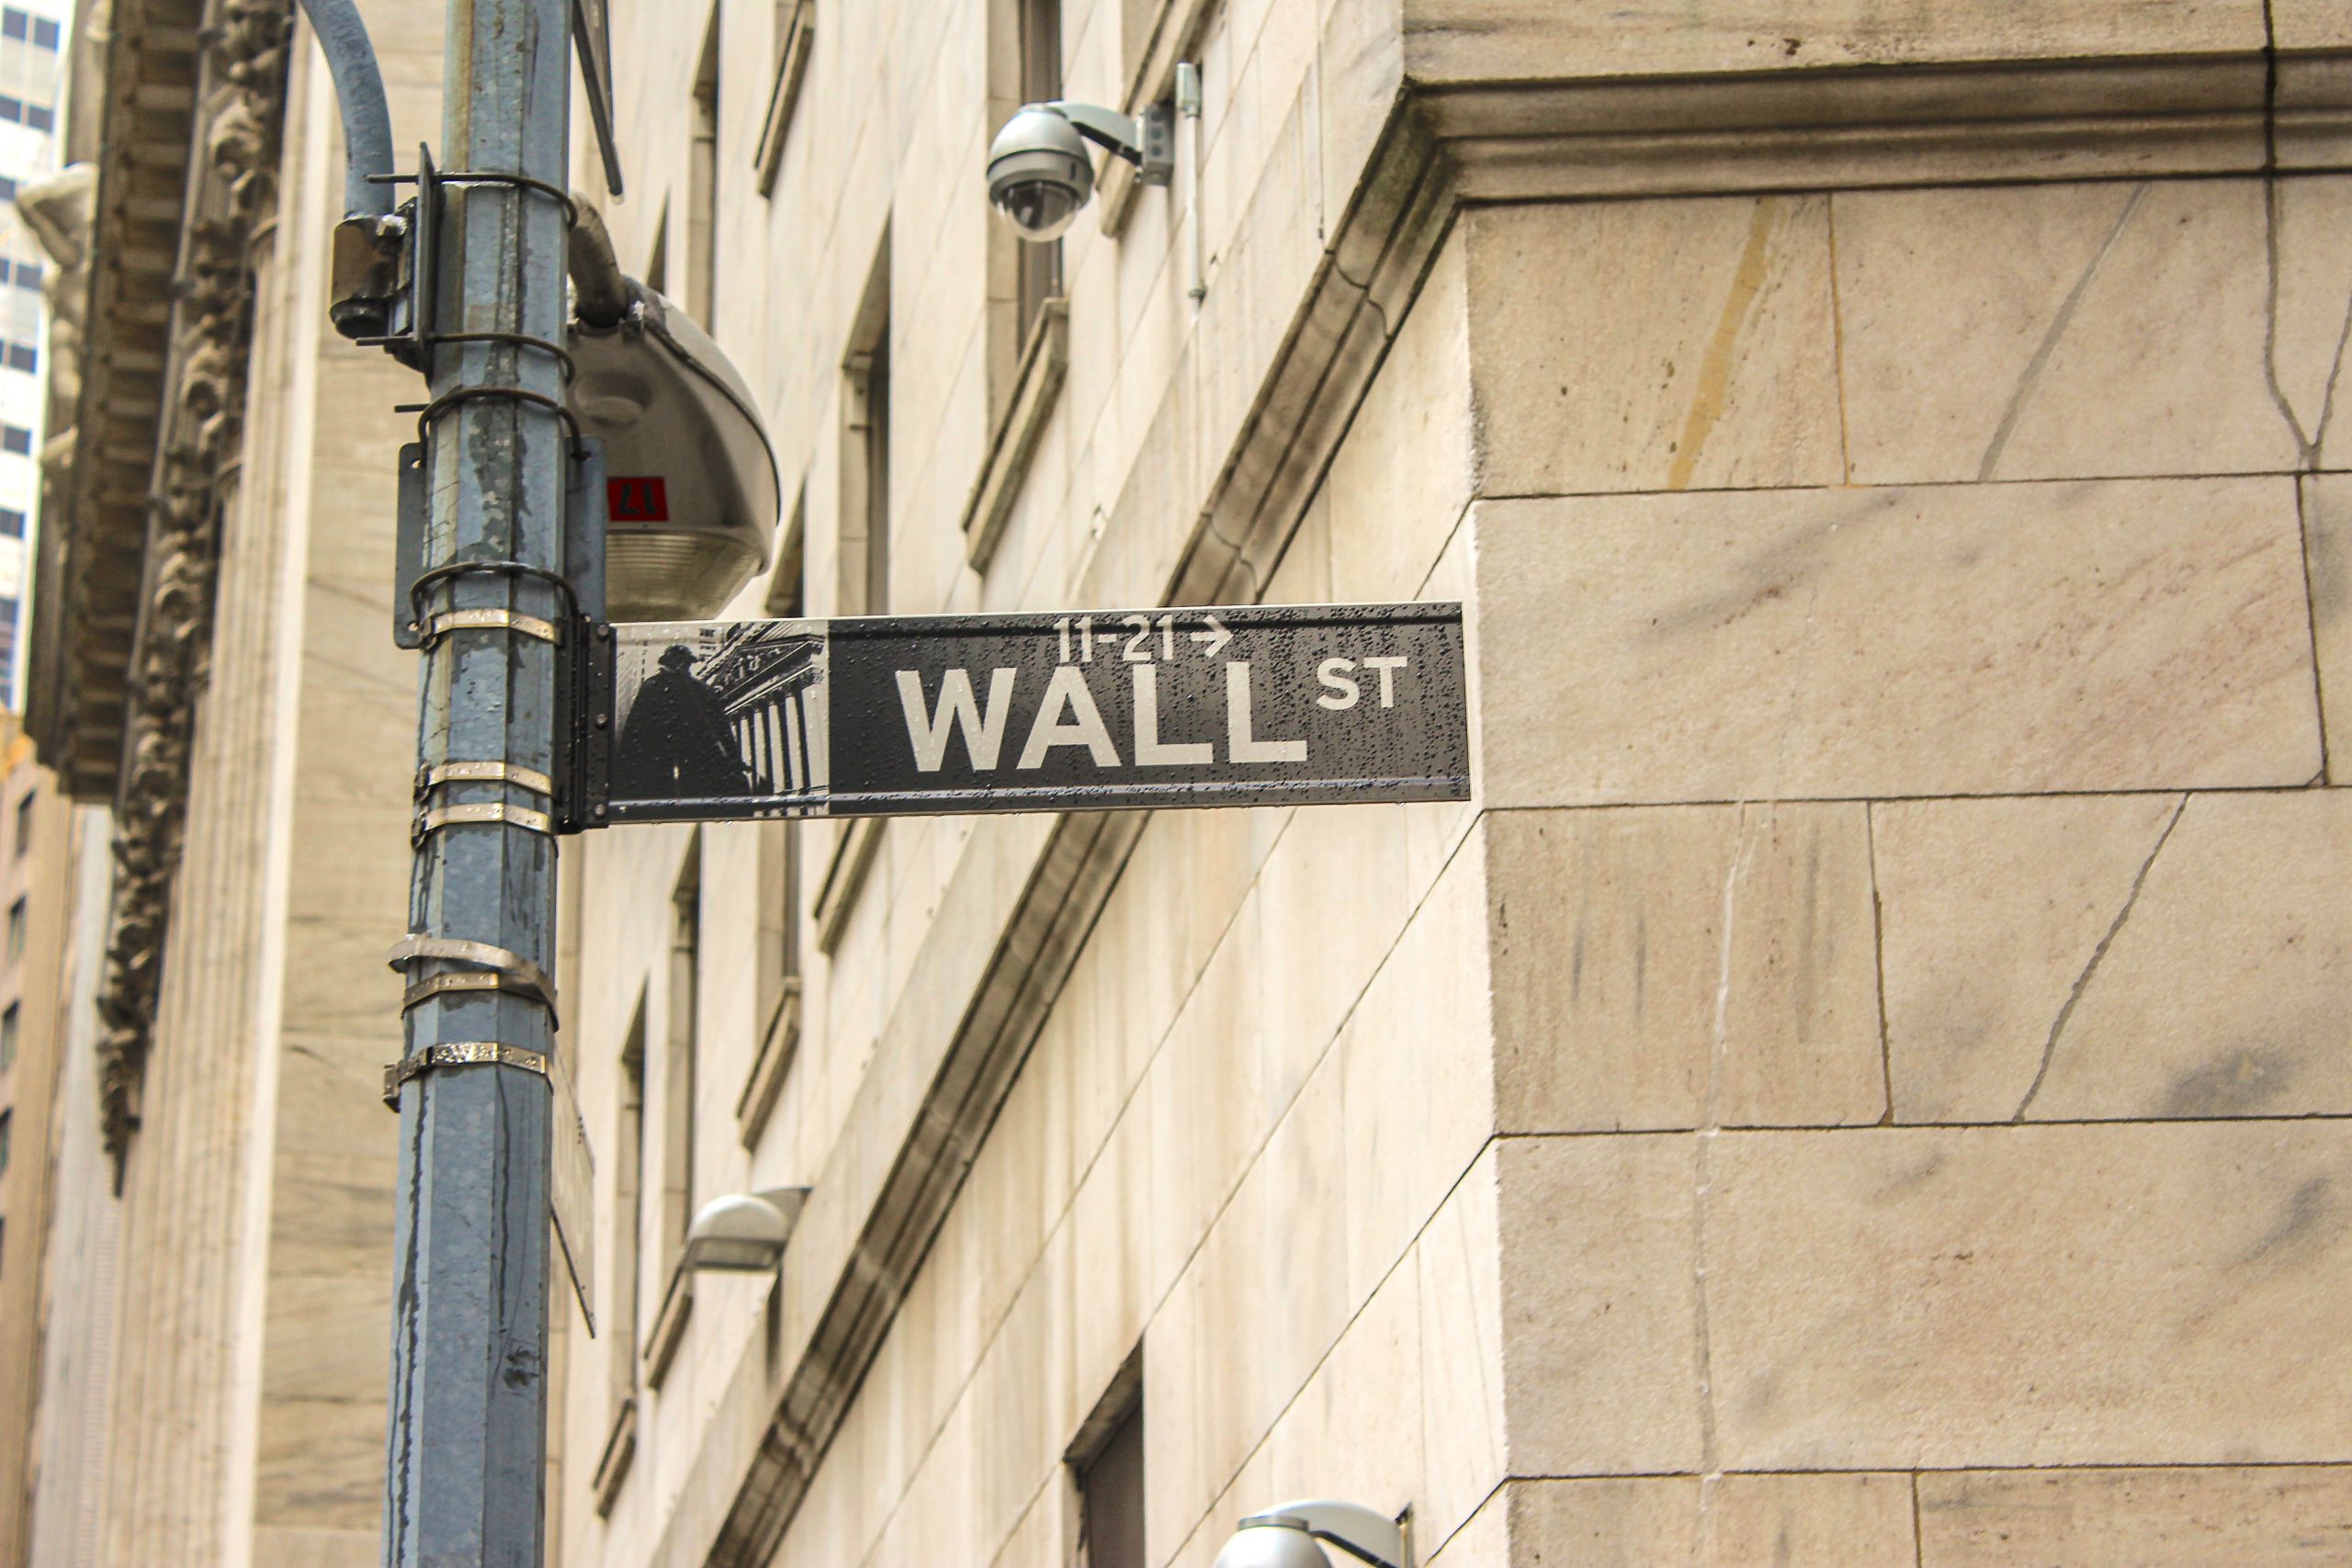 New York street sign for Wall Street.